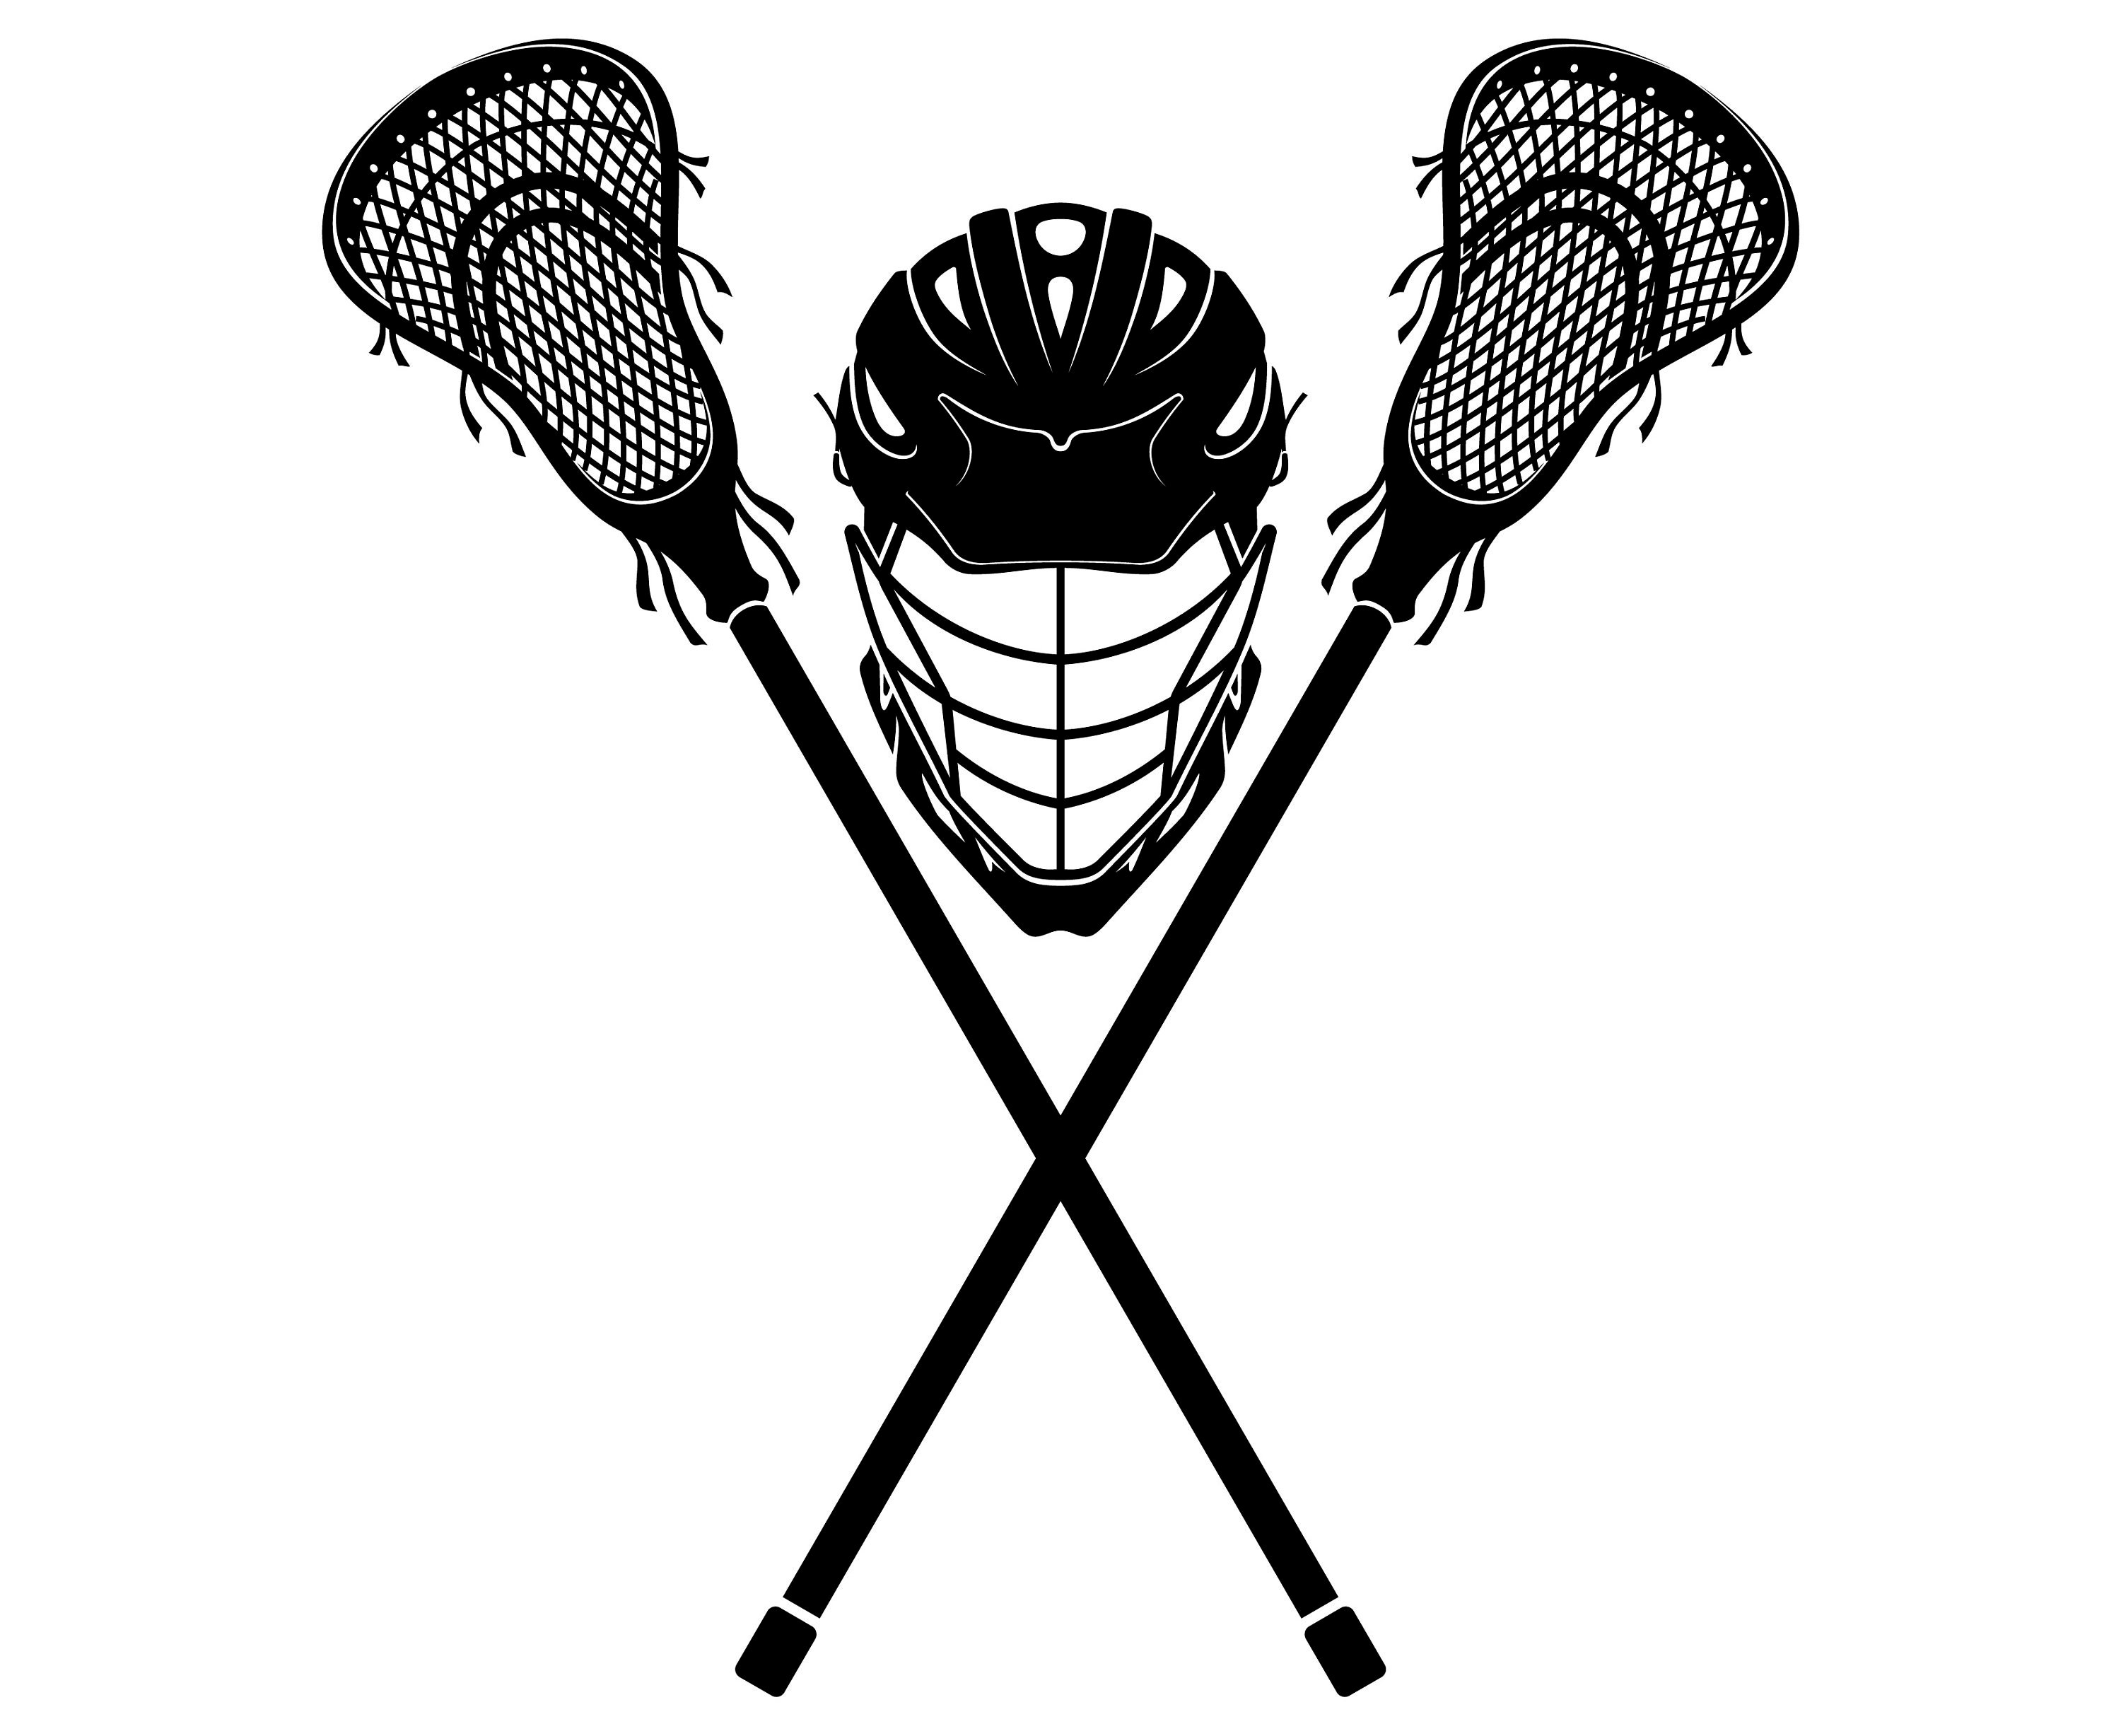 Sizing Lacrosse Sticks for Youth Players.